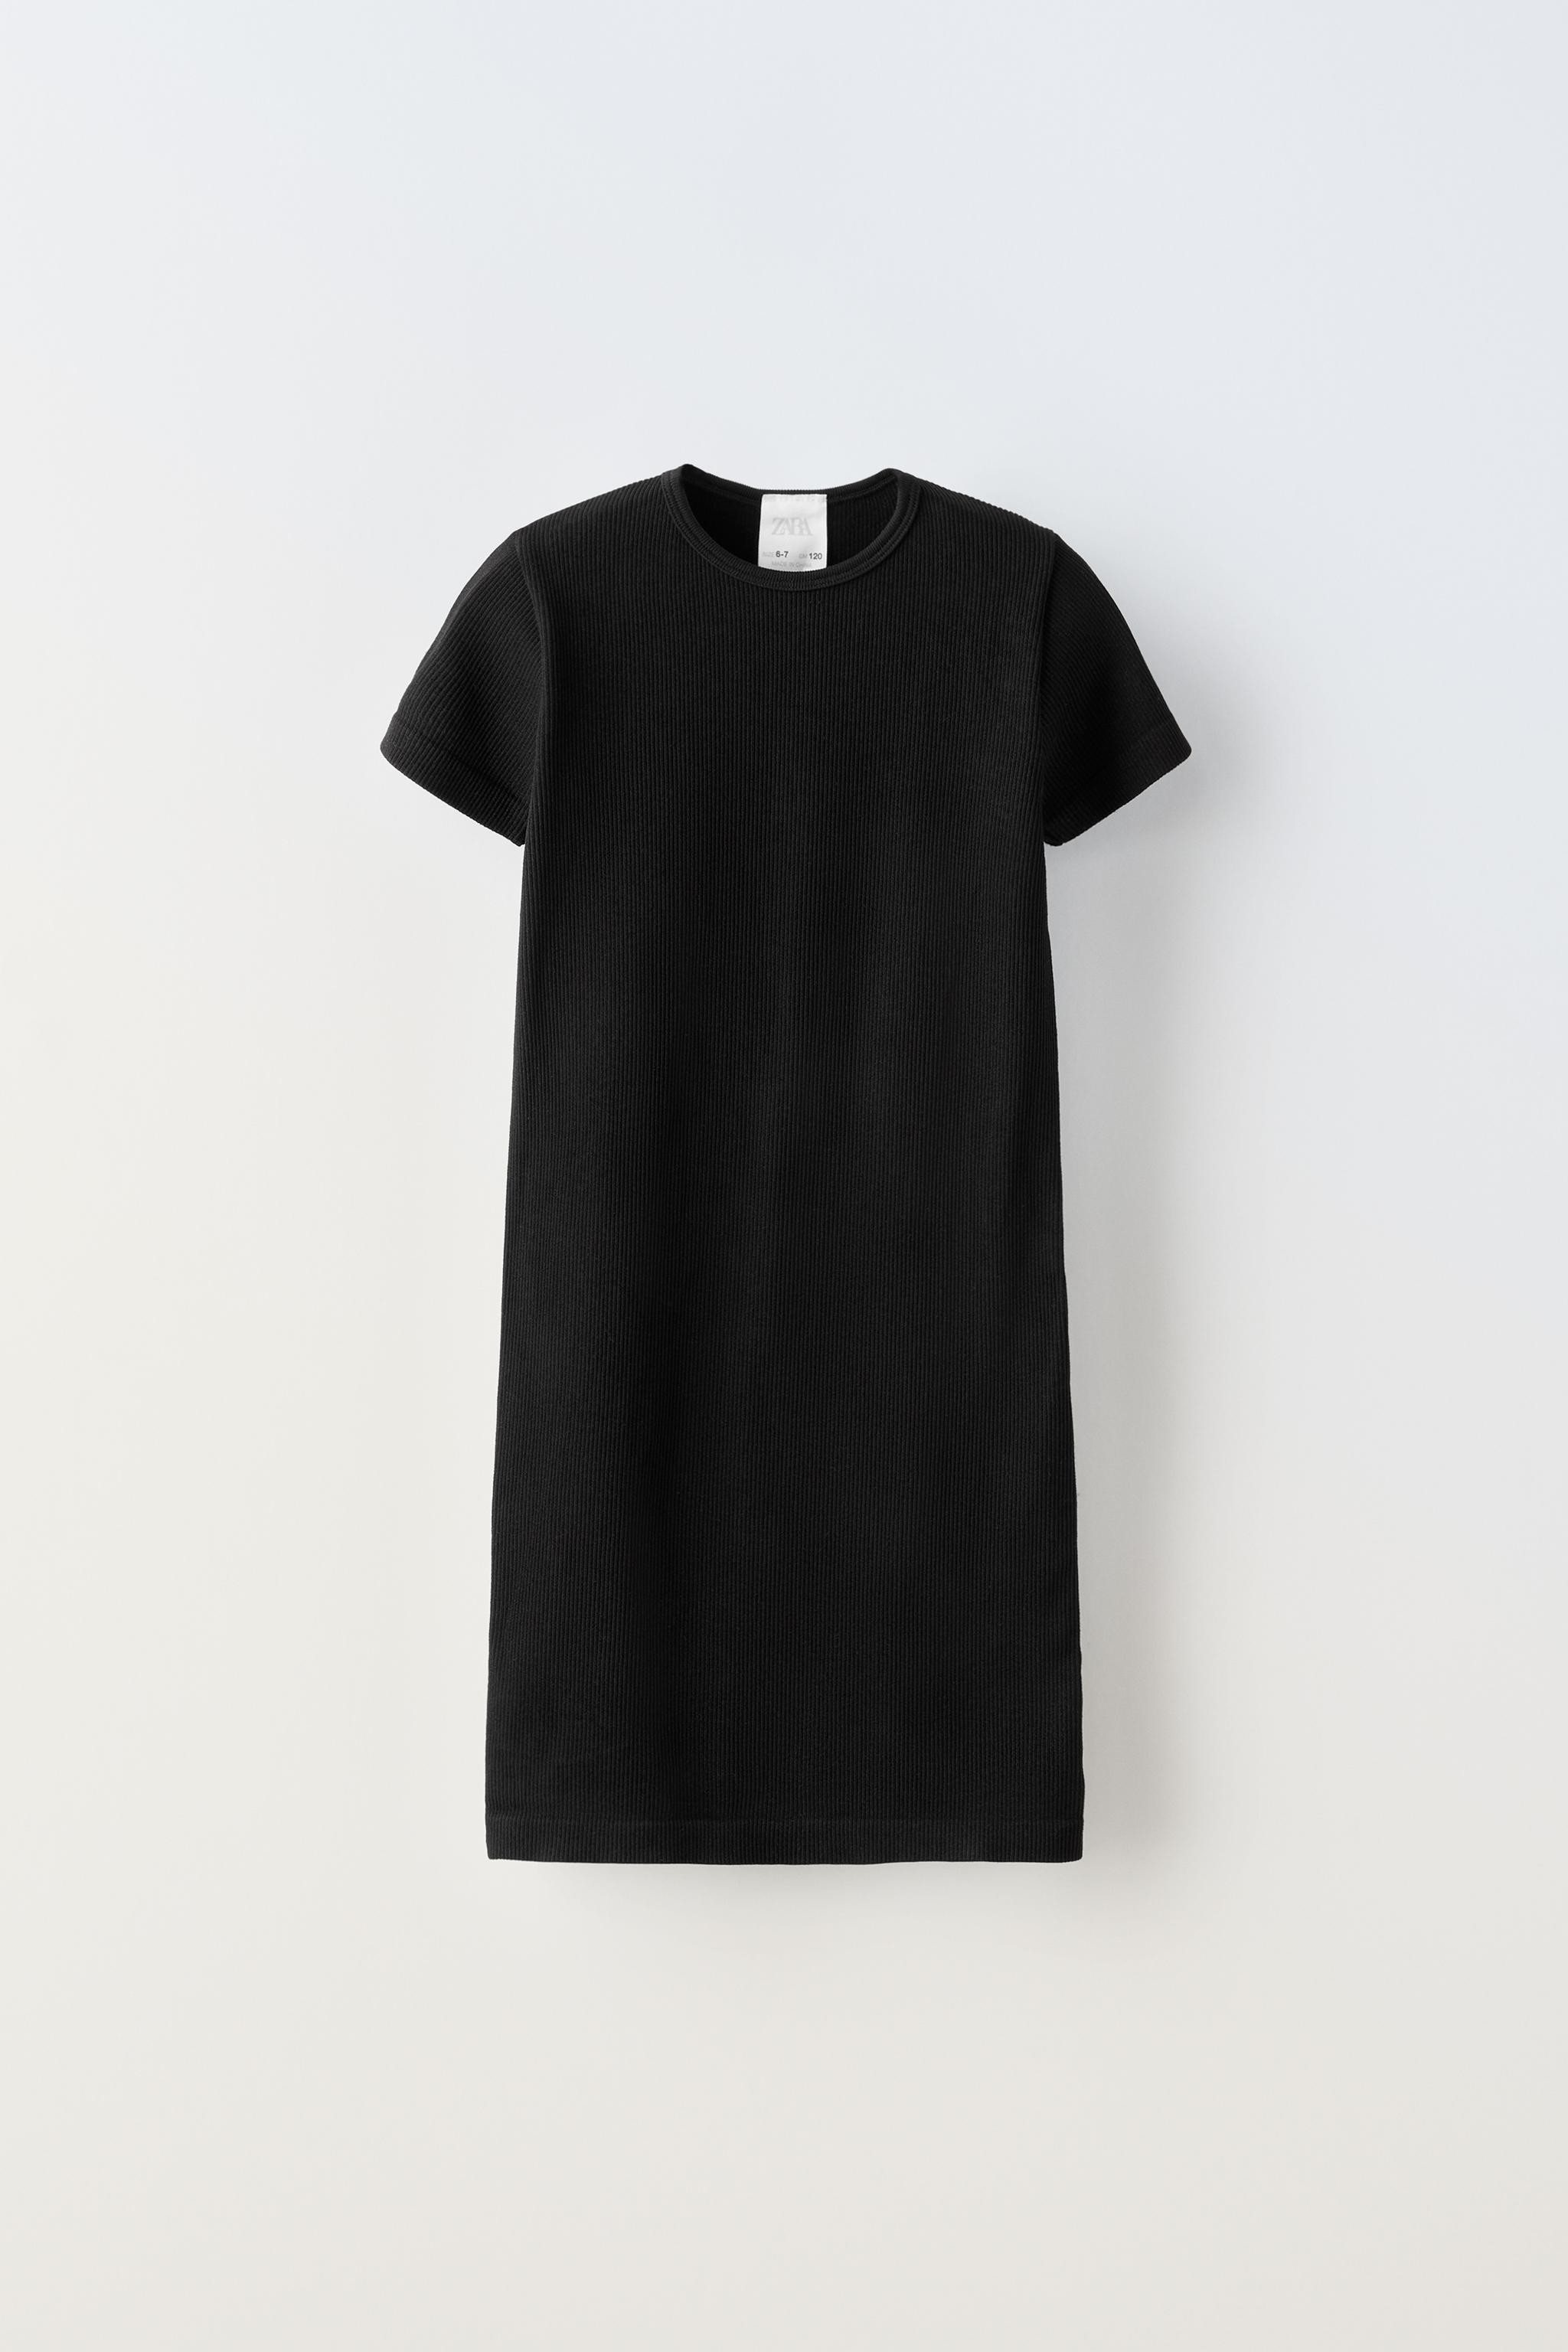 I tried seamless little black dress from Zara - it's chef's kiss and costs  just €22.95